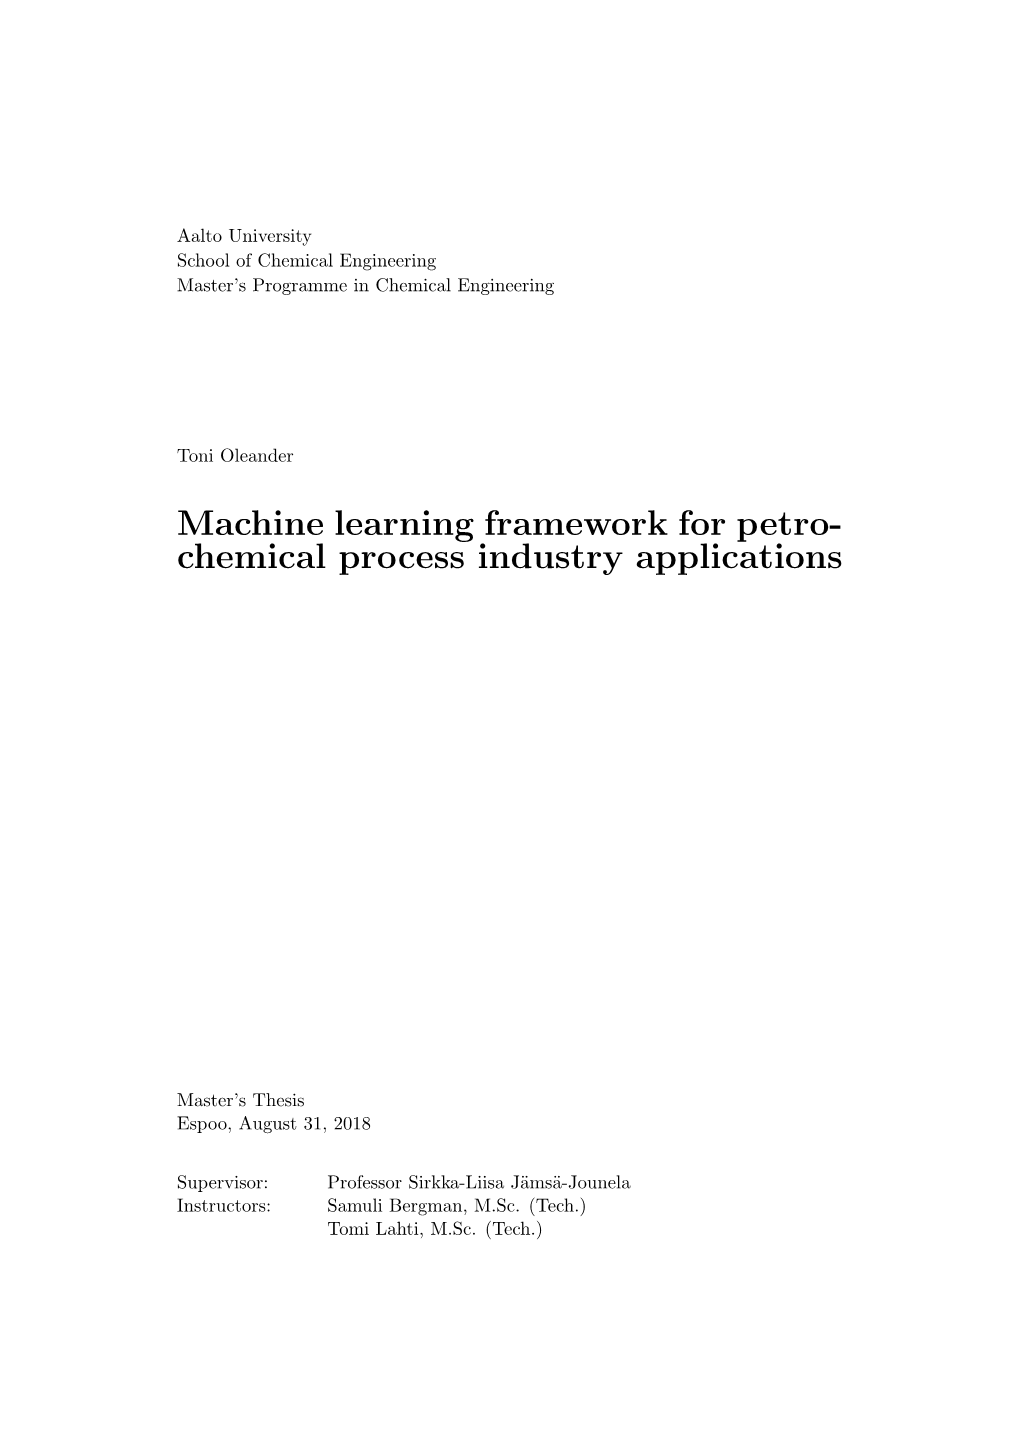 Machine Learning Framework for Petrochemical Process Industry